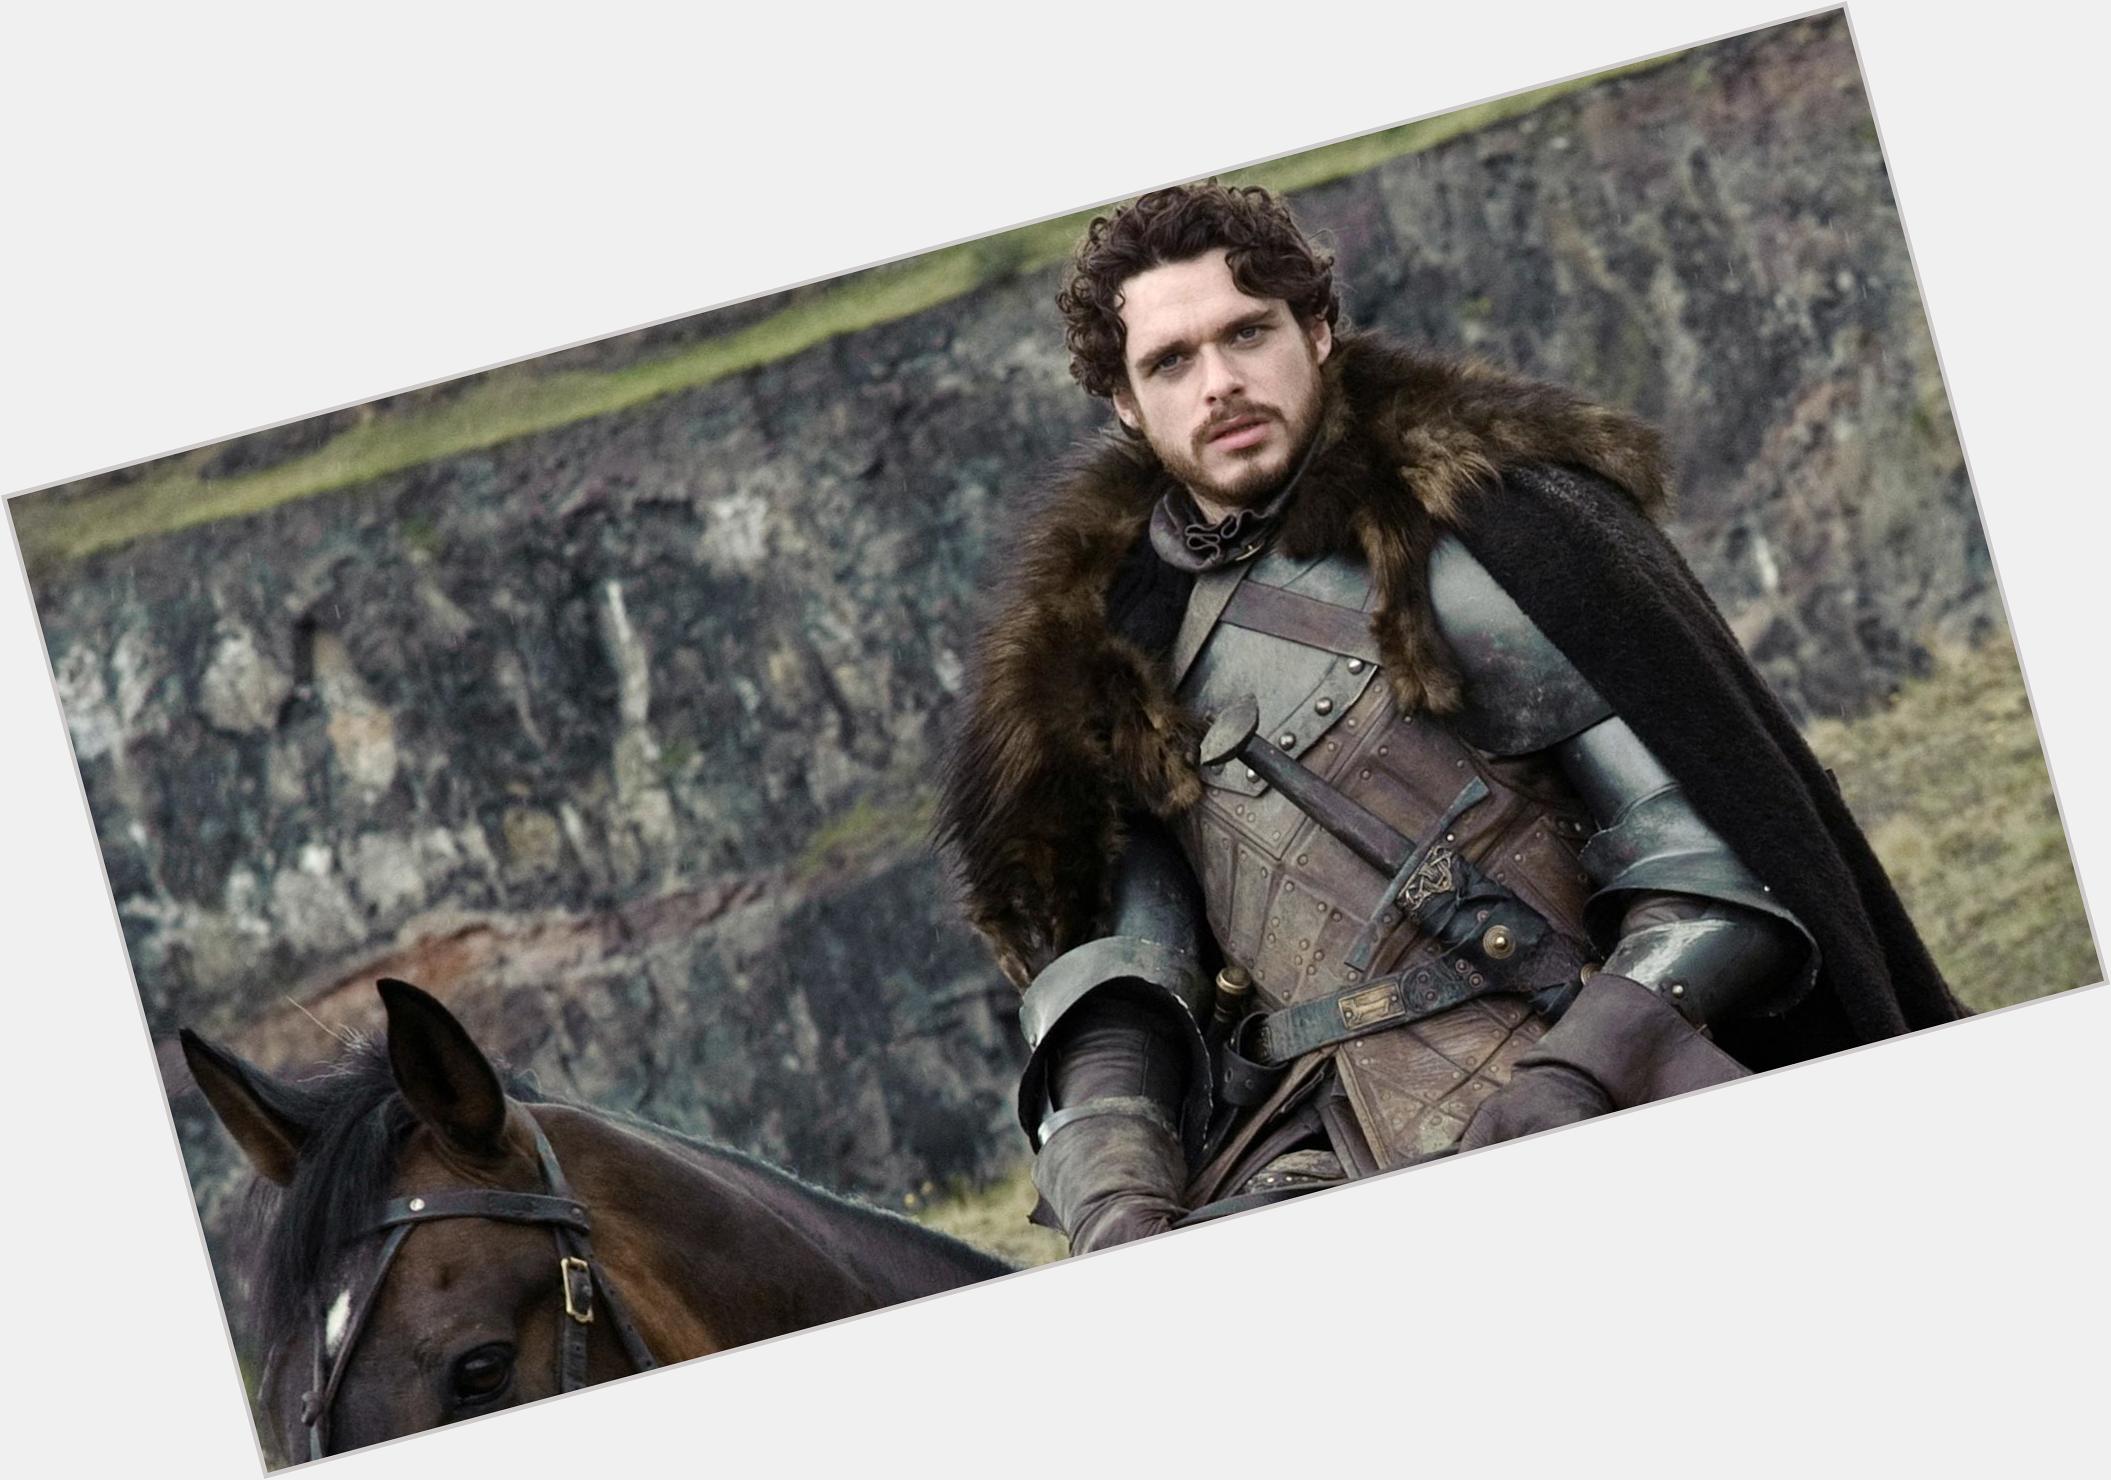 <a href="/hot-men/robb-stark/is-he-dead-really-alive-avenged">Robb Stark</a> Athletic body,  dark brown hair & hairstyles